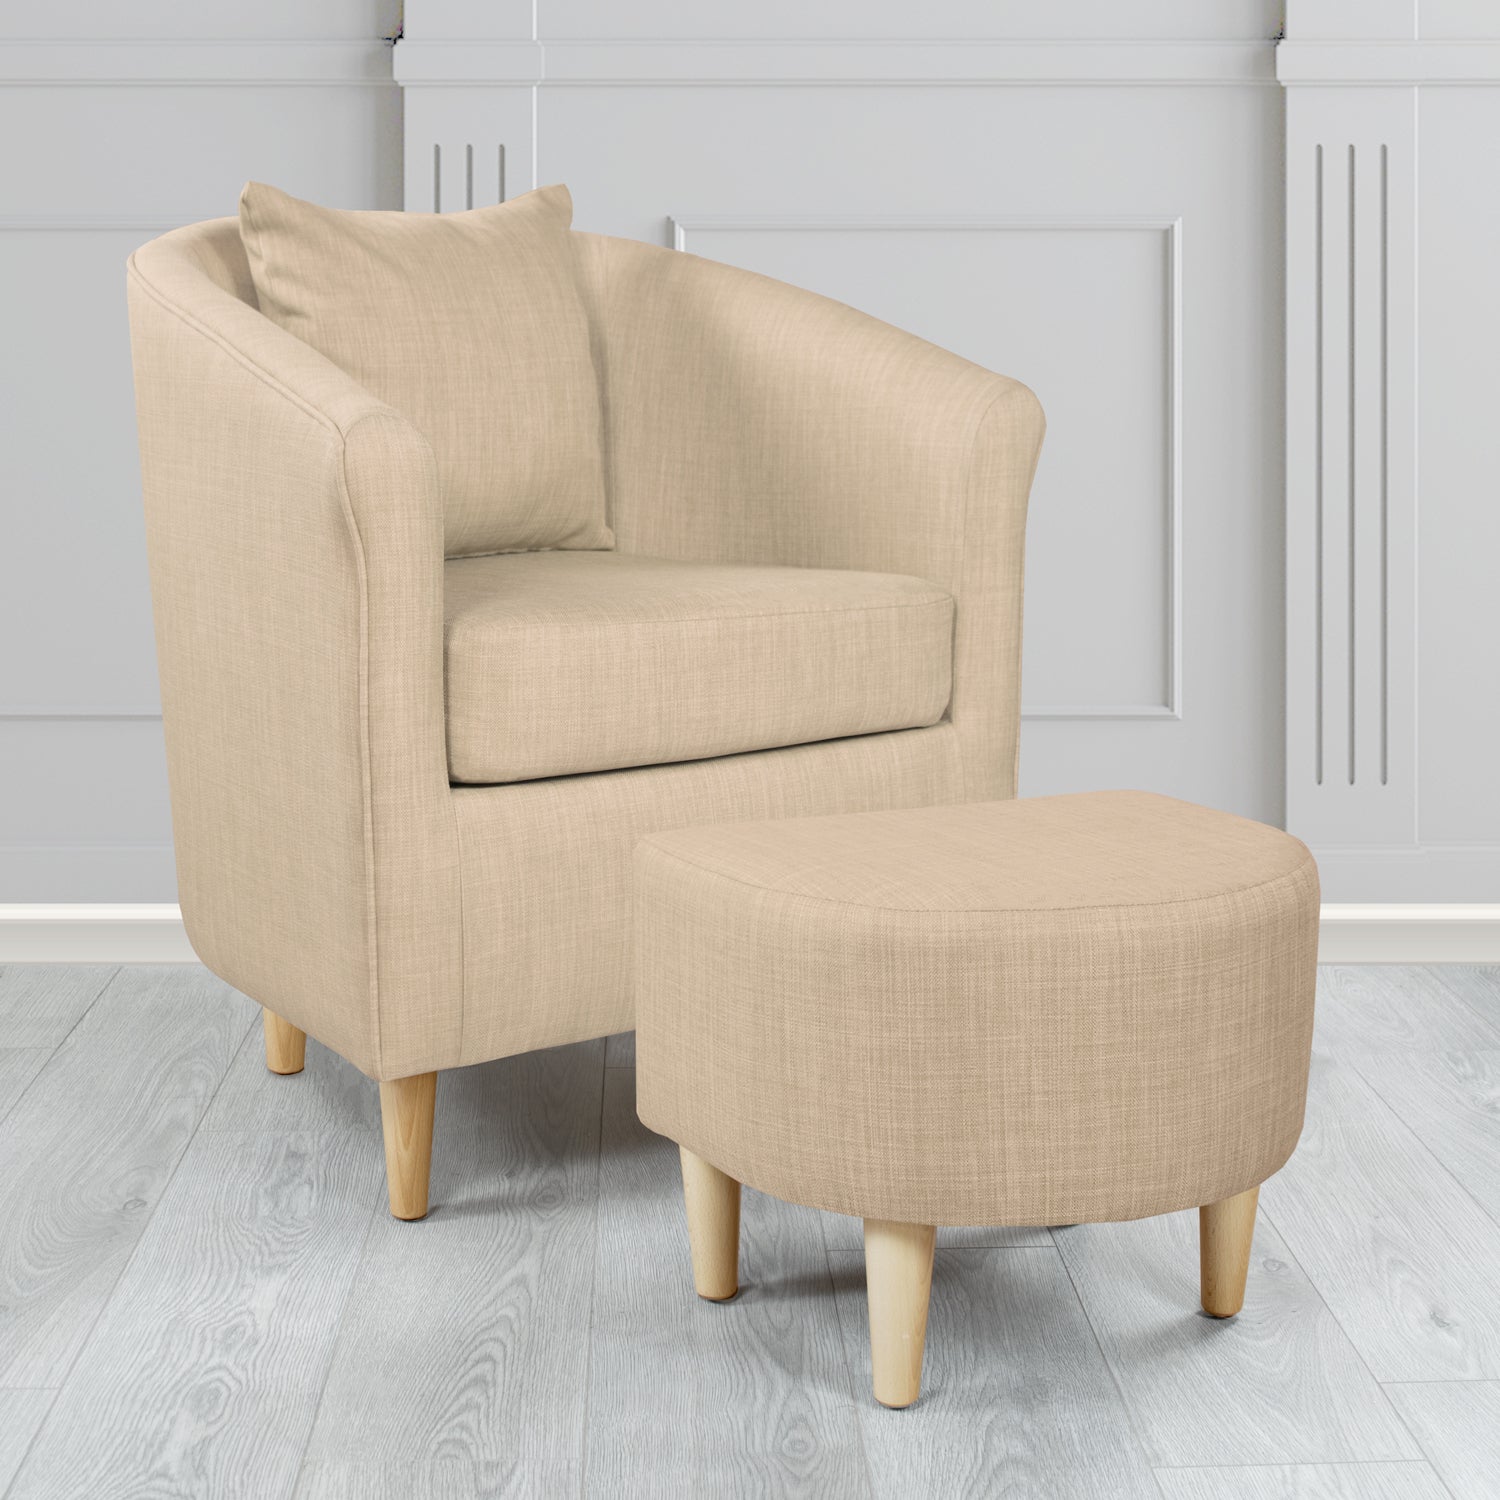 St Tropez Charles Sand Plain Linen Fabric Tub Chair & Footstool Set with Scatter Cushion - The Tub Chair Shop